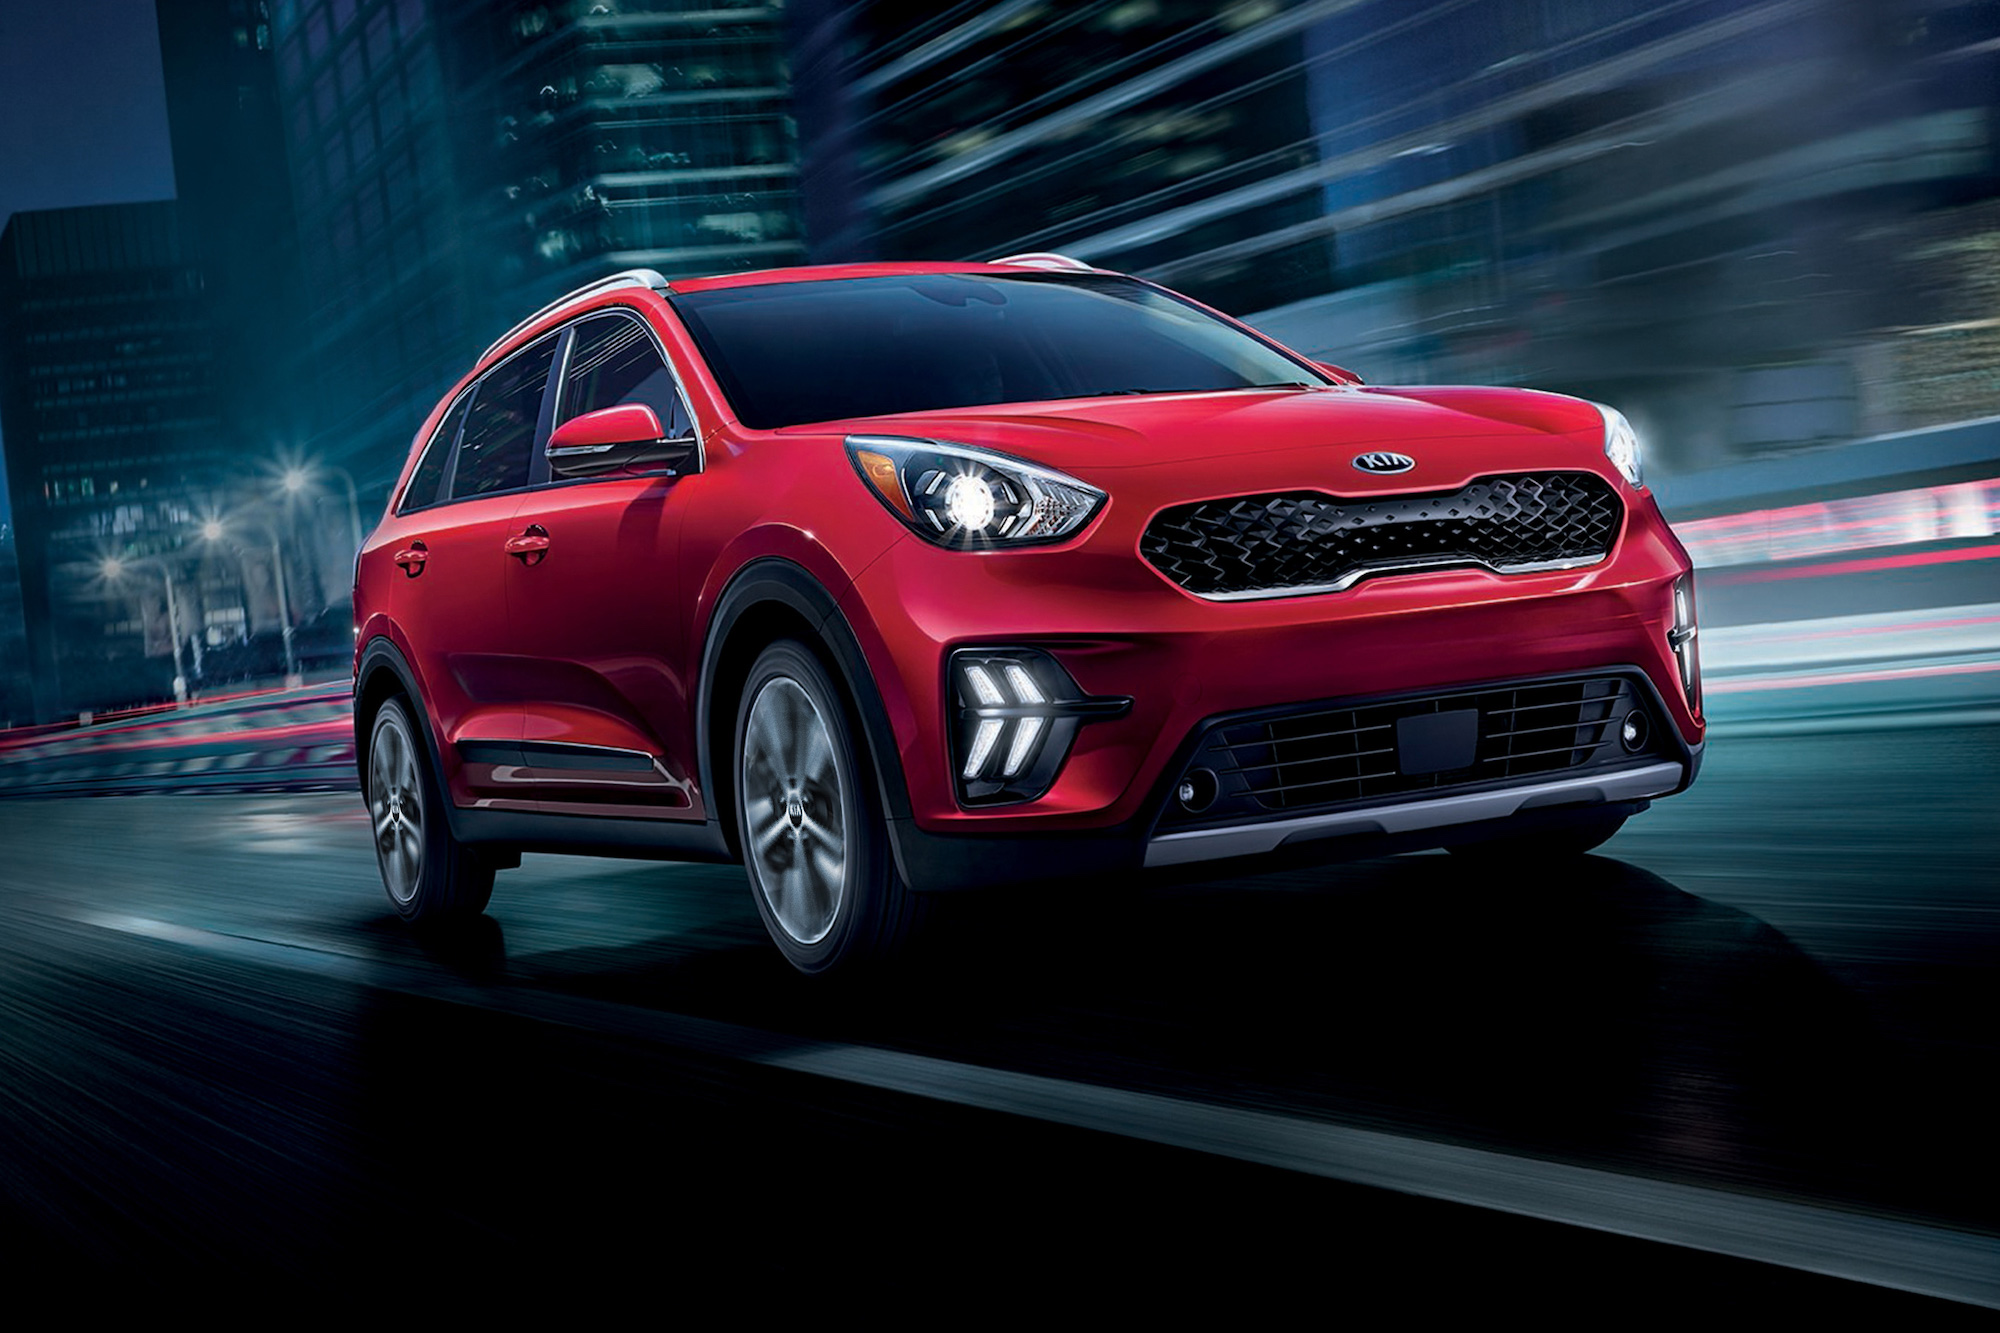 A red 2021 Kia Niro plug-in hybrid compact SUV traveling on a wet city street at night